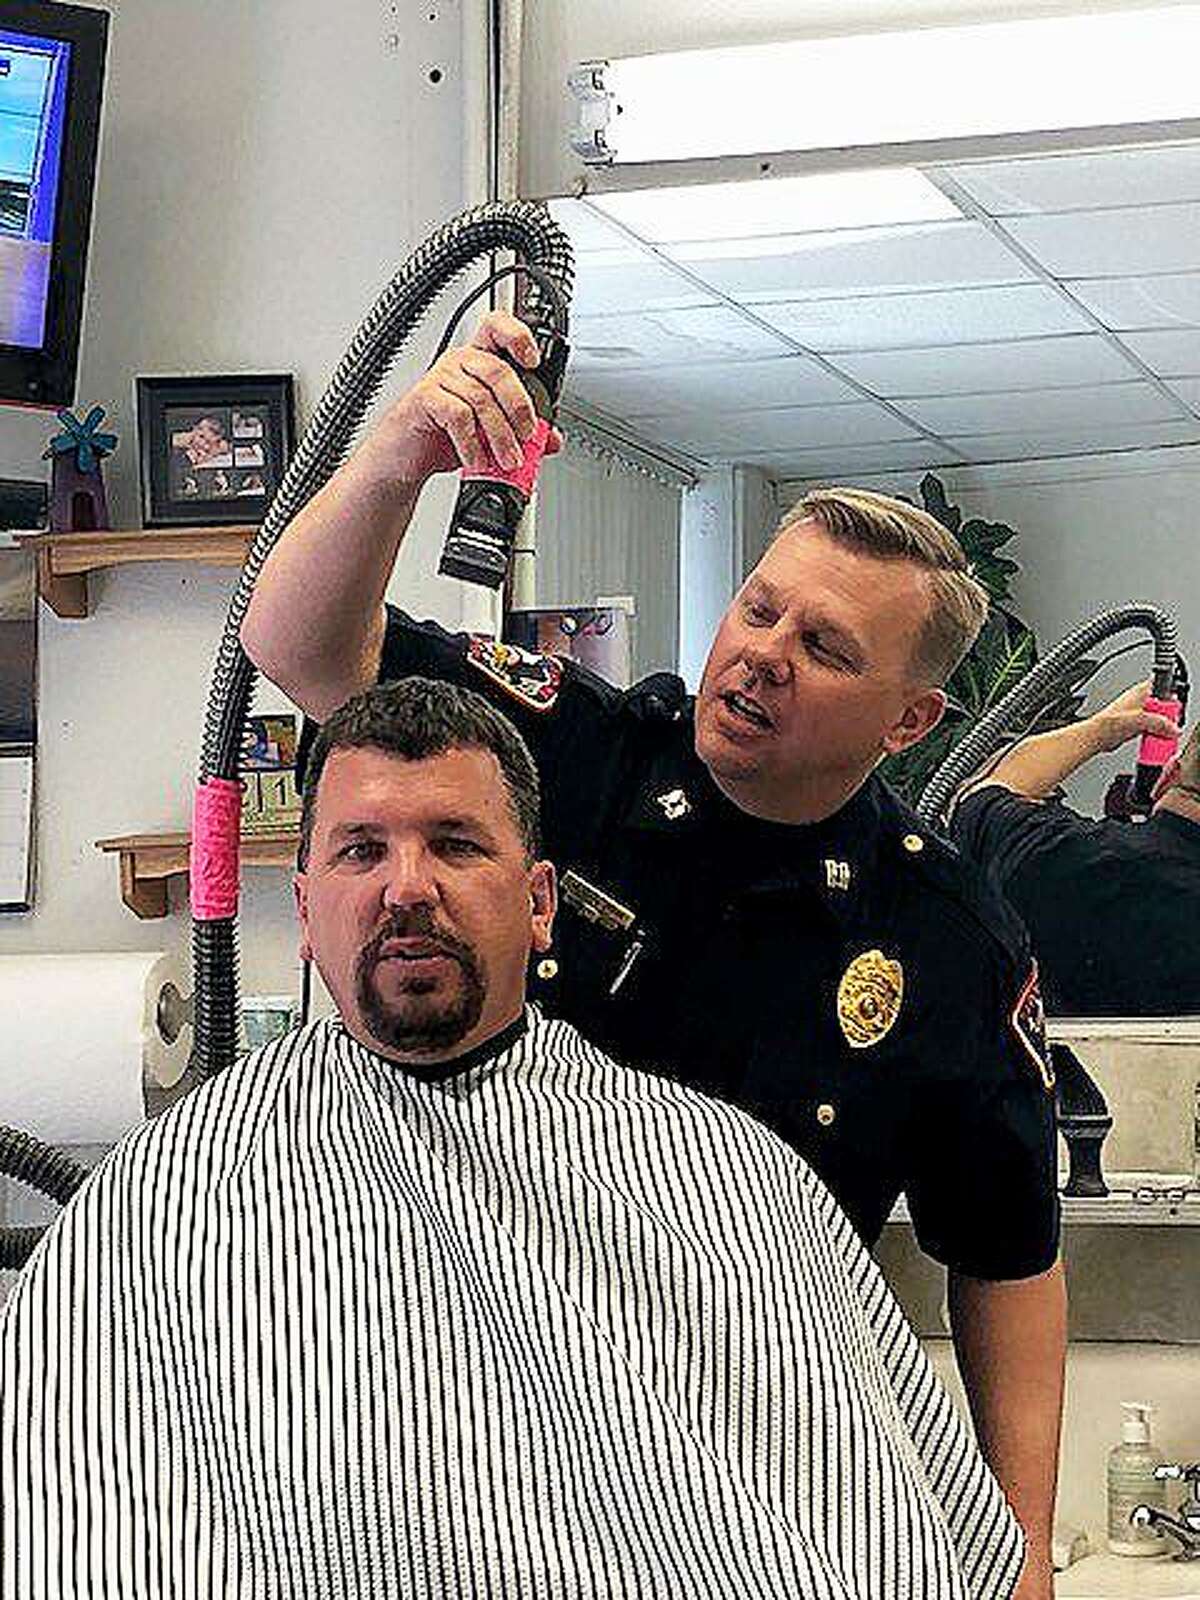 Capt. John Coleman holds the shears and begins to cut the hair of his Chief John Headrick. The two officers shaved their heads in support of Councilman Alvin Burress and his wife, Dana Shepard earlier this year.